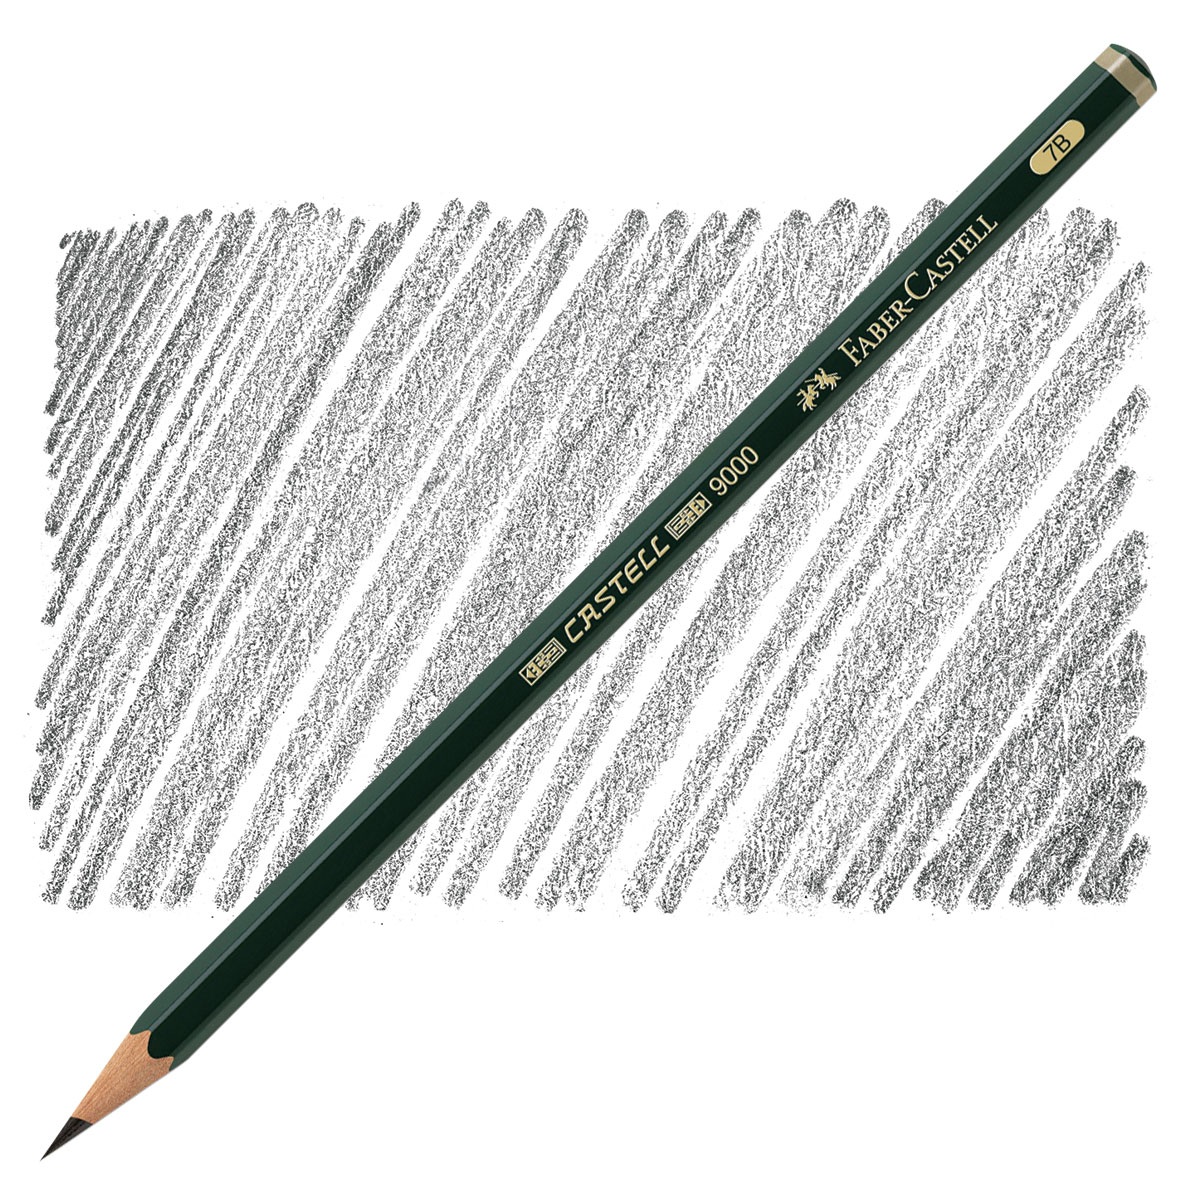 Faber-Castell Castell 9000 HB pencil – Scribe Market